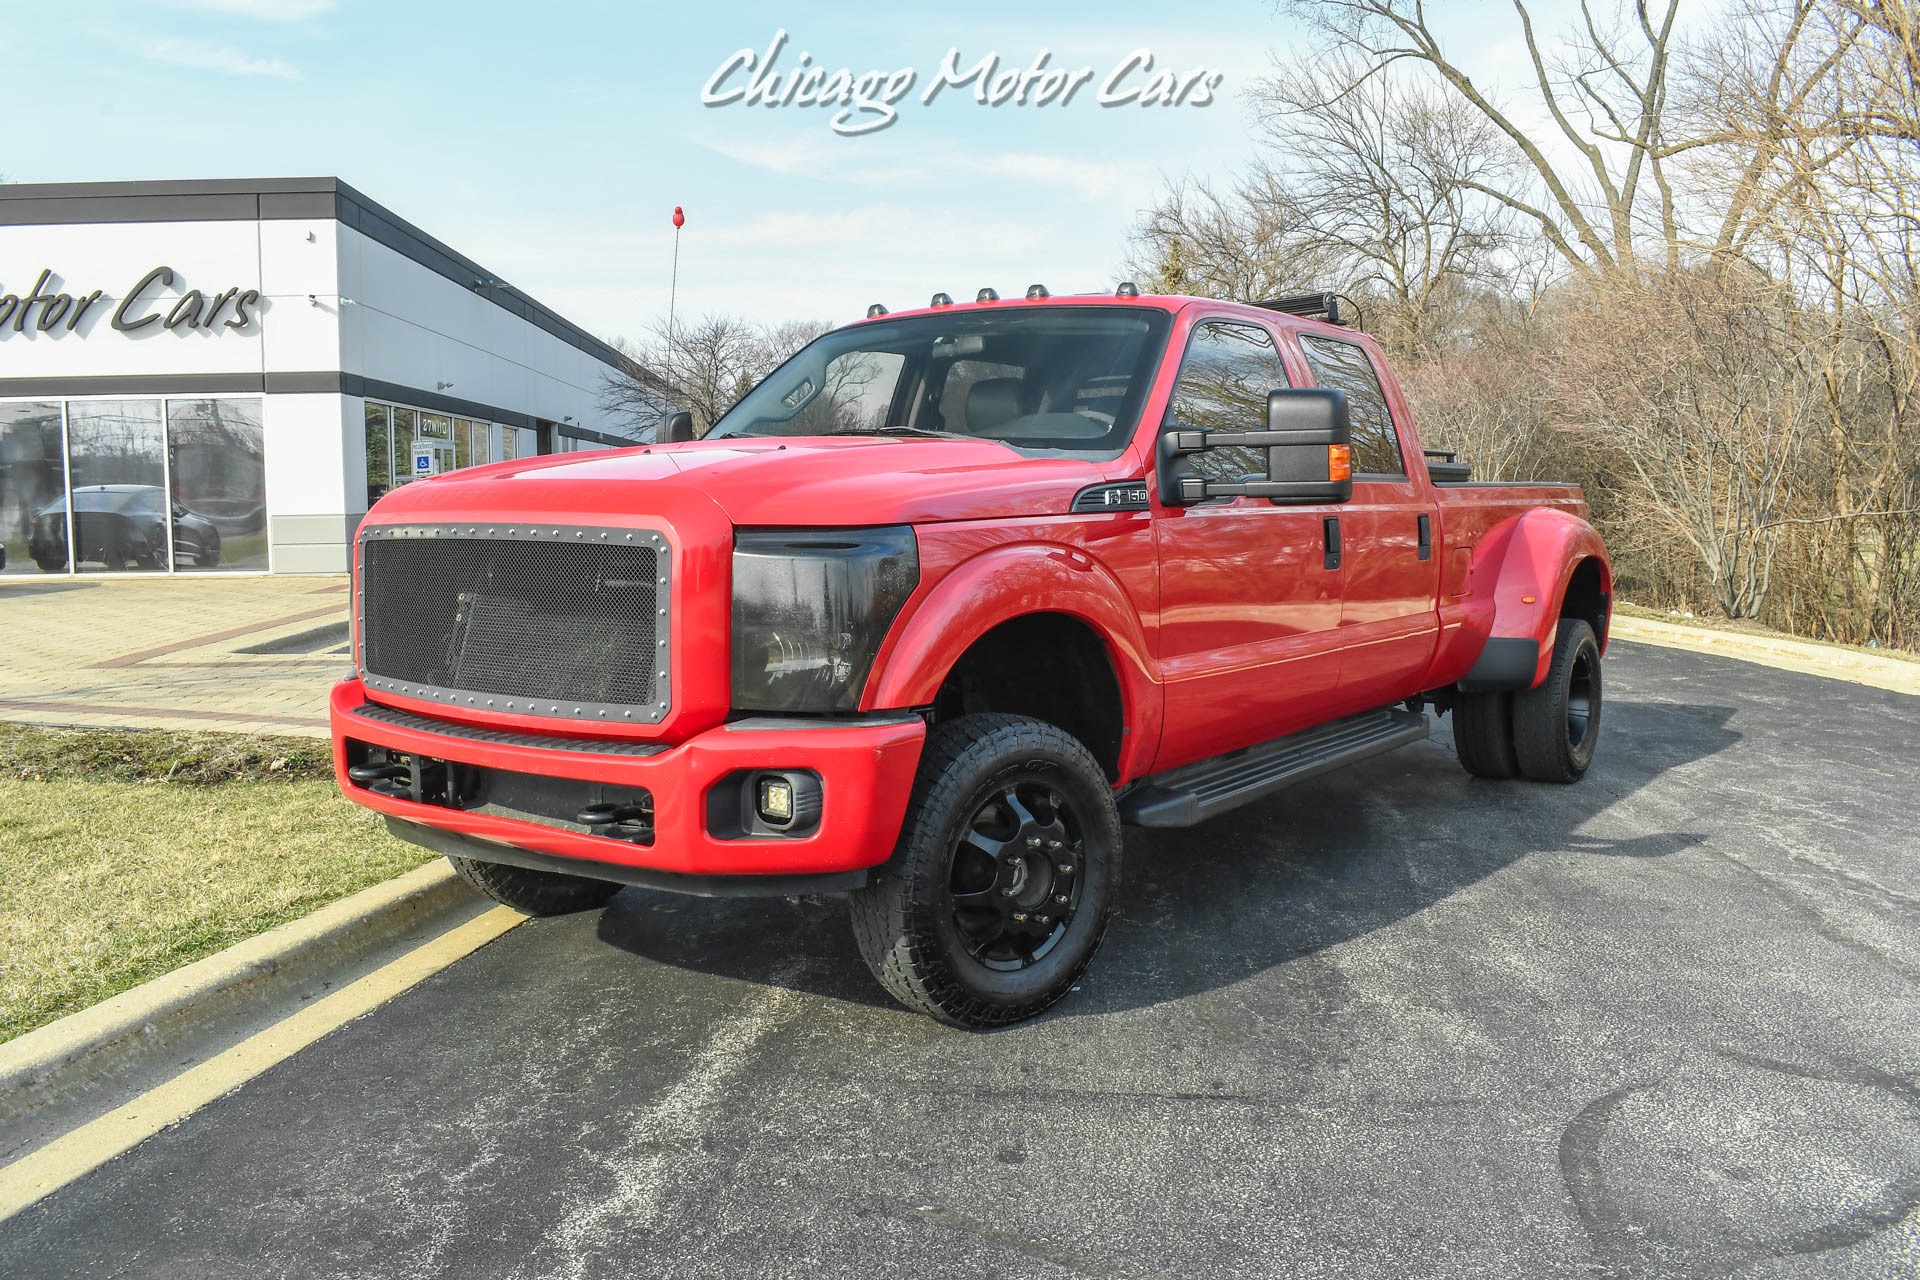 Used-2013-Ford-F-350-Super-Duty-Dually-XL-4X4-Crewcab-Pickup-62L-V8-Cruise-Control-Power-Equipment-Group